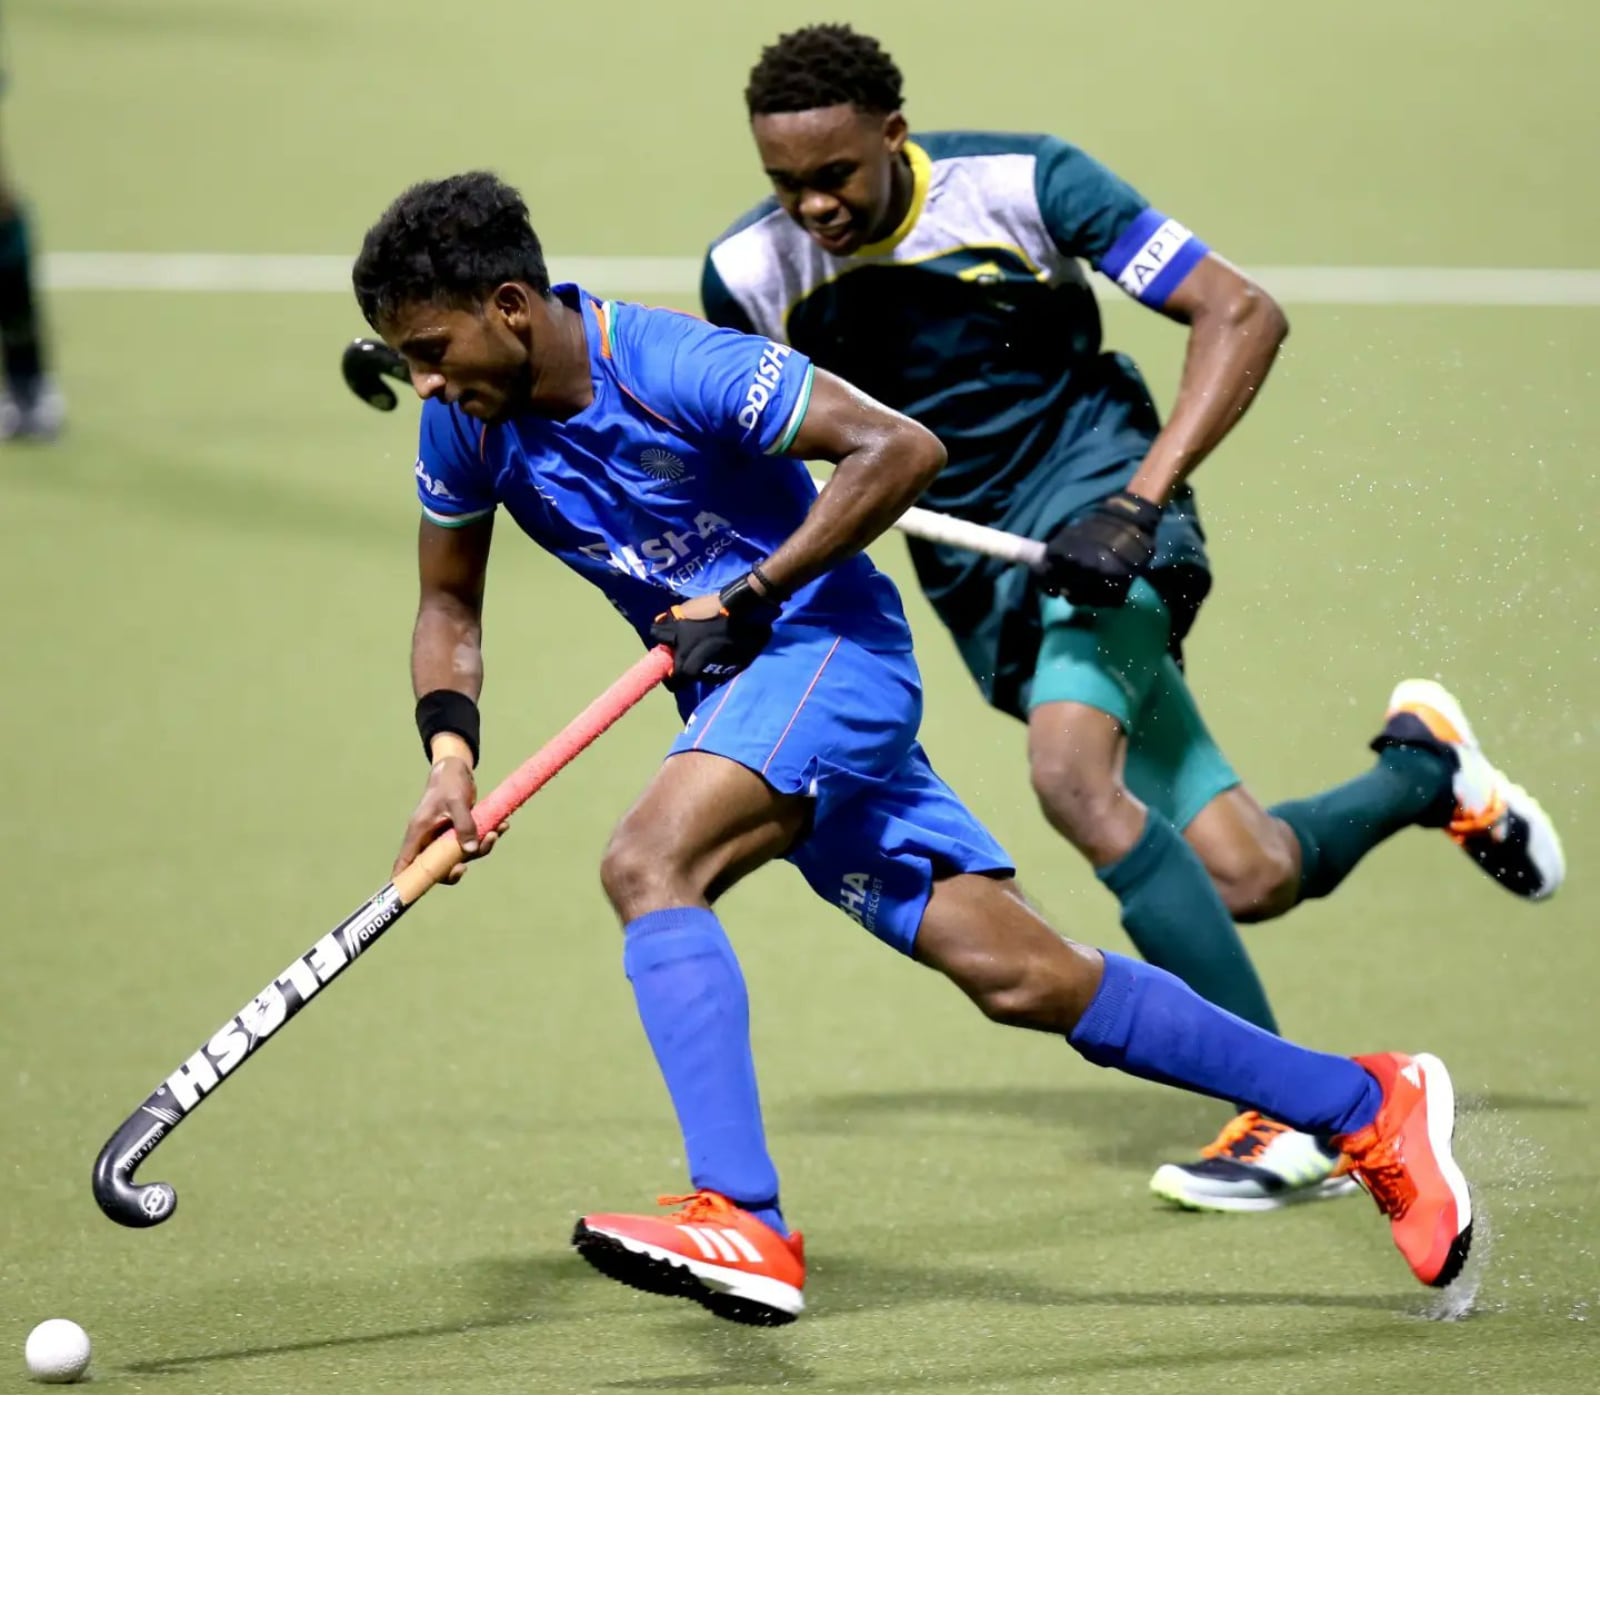 Sultan of Johor Cup Indian Junior Mens Hockey Team Go Down 4-5 to South Africa